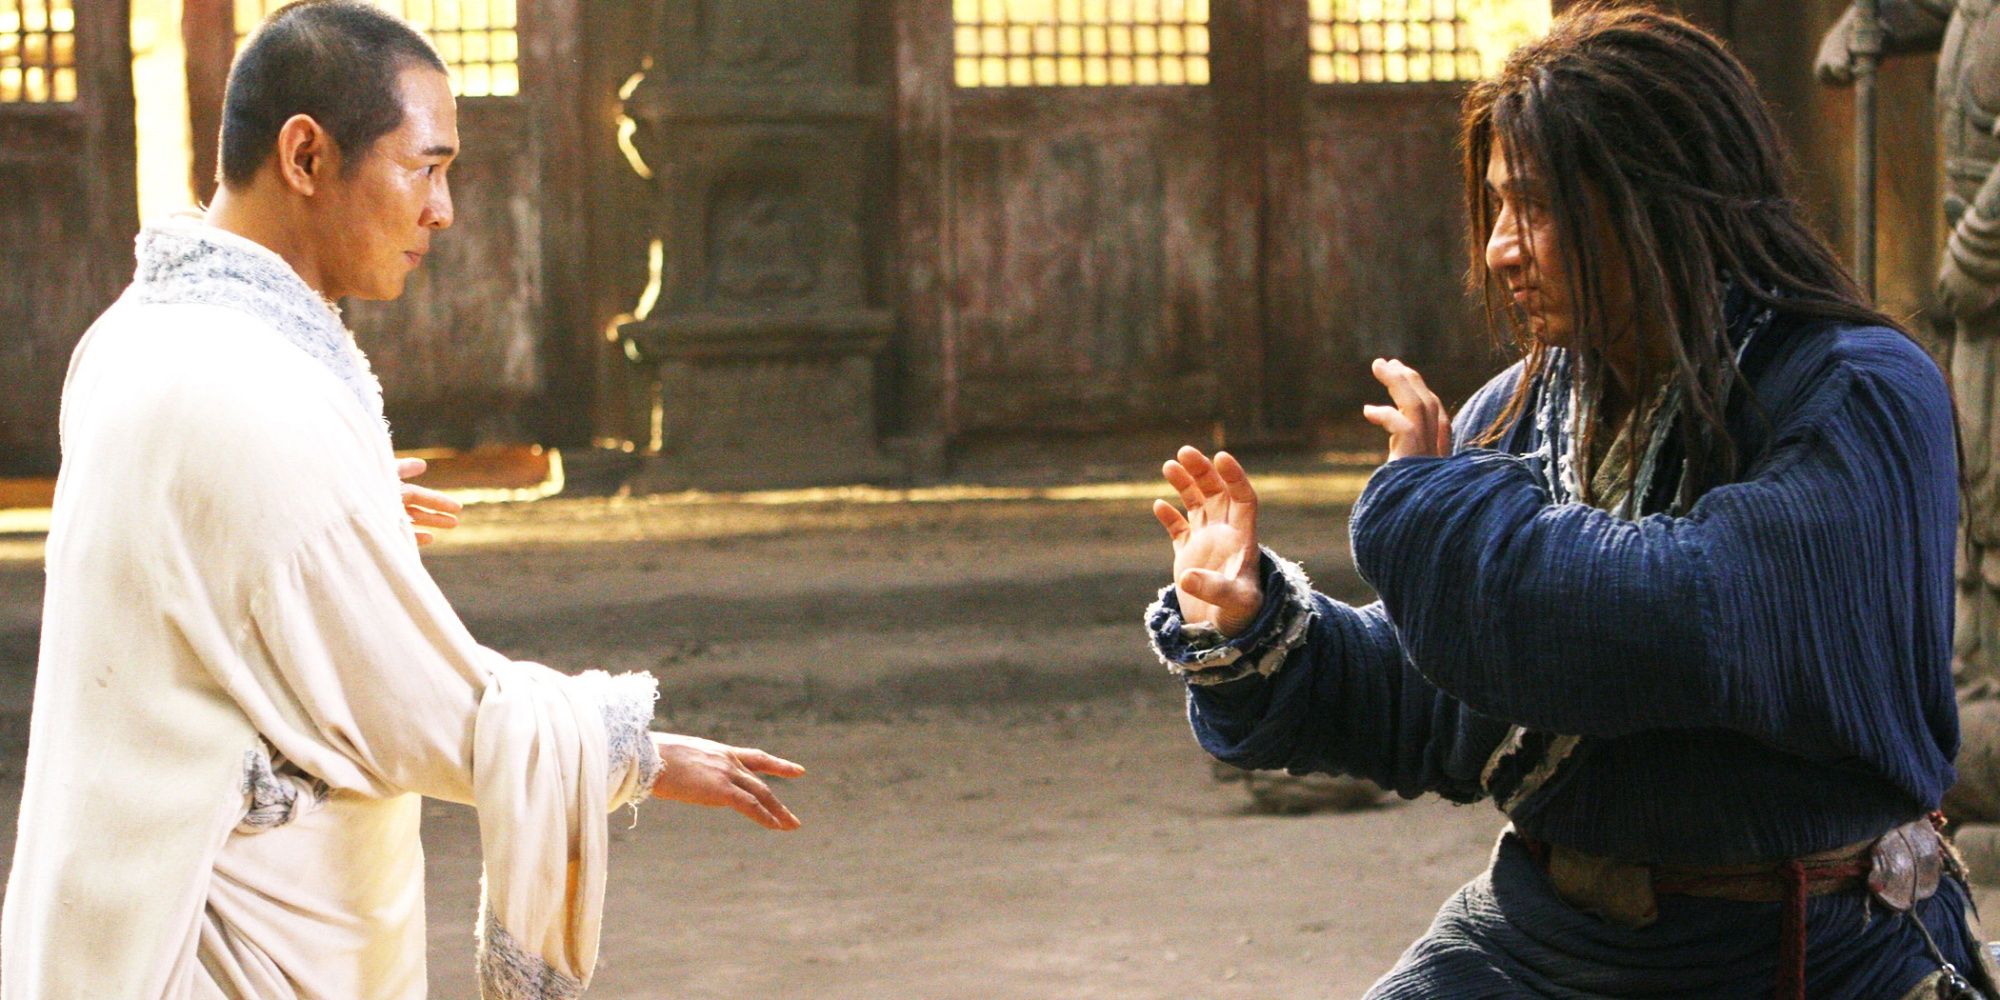 Jackie Chan and Jet Li face each other in battle